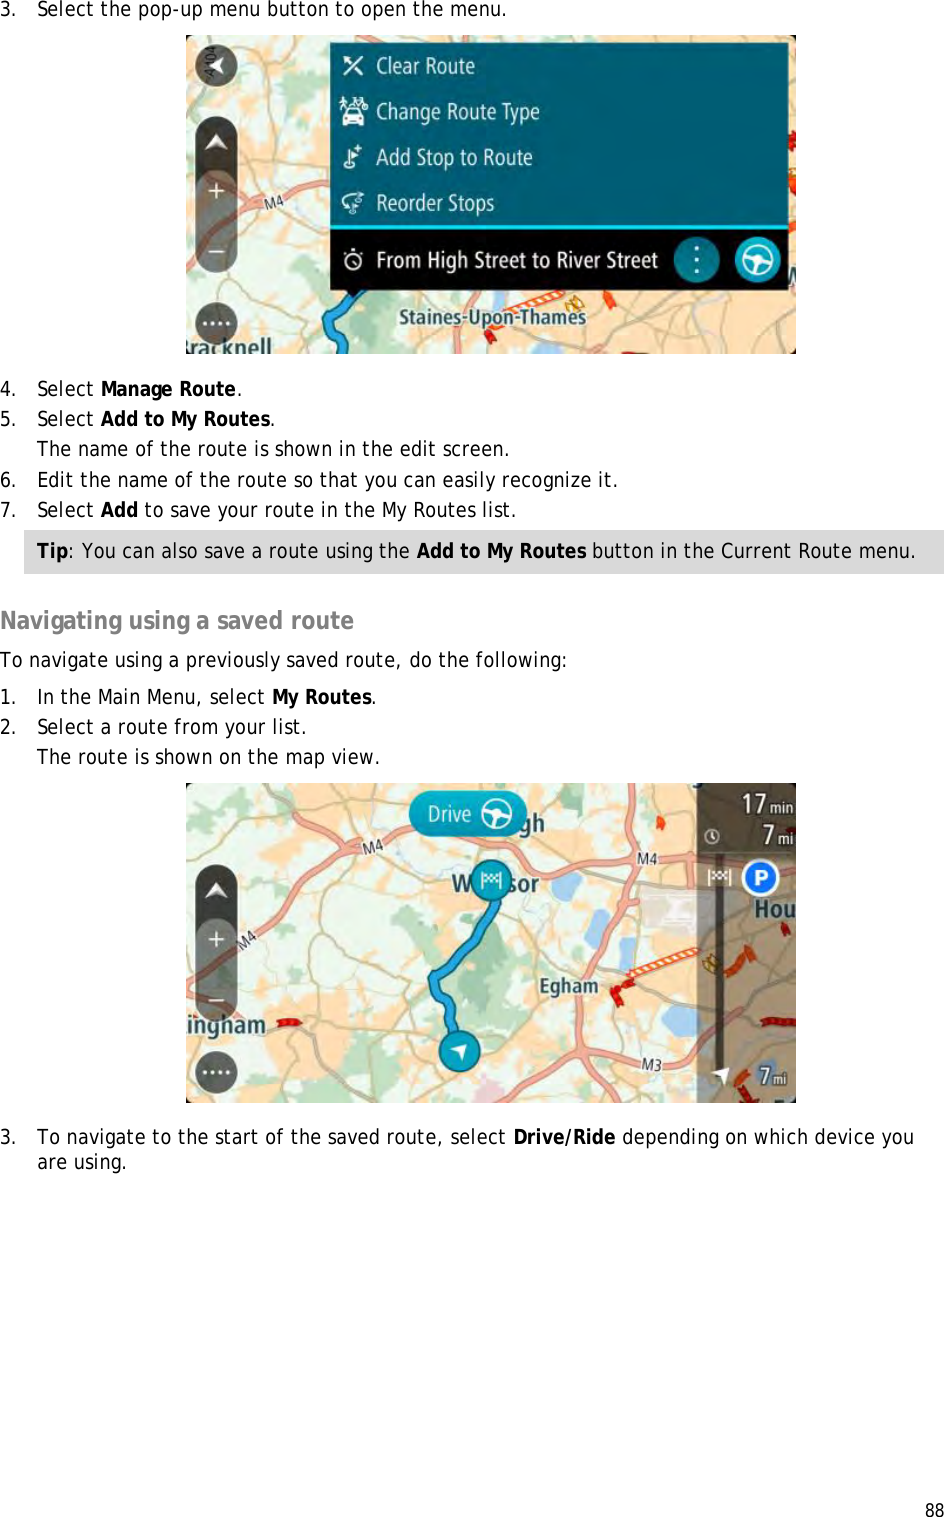  88  3. Select the pop-up menu button to open the menu.  4. Select Manage Route. 5. Select Add to My Routes. The name of the route is shown in the edit screen. 6. Edit the name of the route so that you can easily recognize it. 7. Select Add to save your route in the My Routes list. Tip: You can also save a route using the Add to My Routes button in the Current Route menu.  Navigating using a saved route To navigate using a previously saved route, do the following: 1. In the Main Menu, select My Routes. 2. Select a route from your list. The route is shown on the map view.  3. To navigate to the start of the saved route, select Drive/Ride depending on which device you are using. 